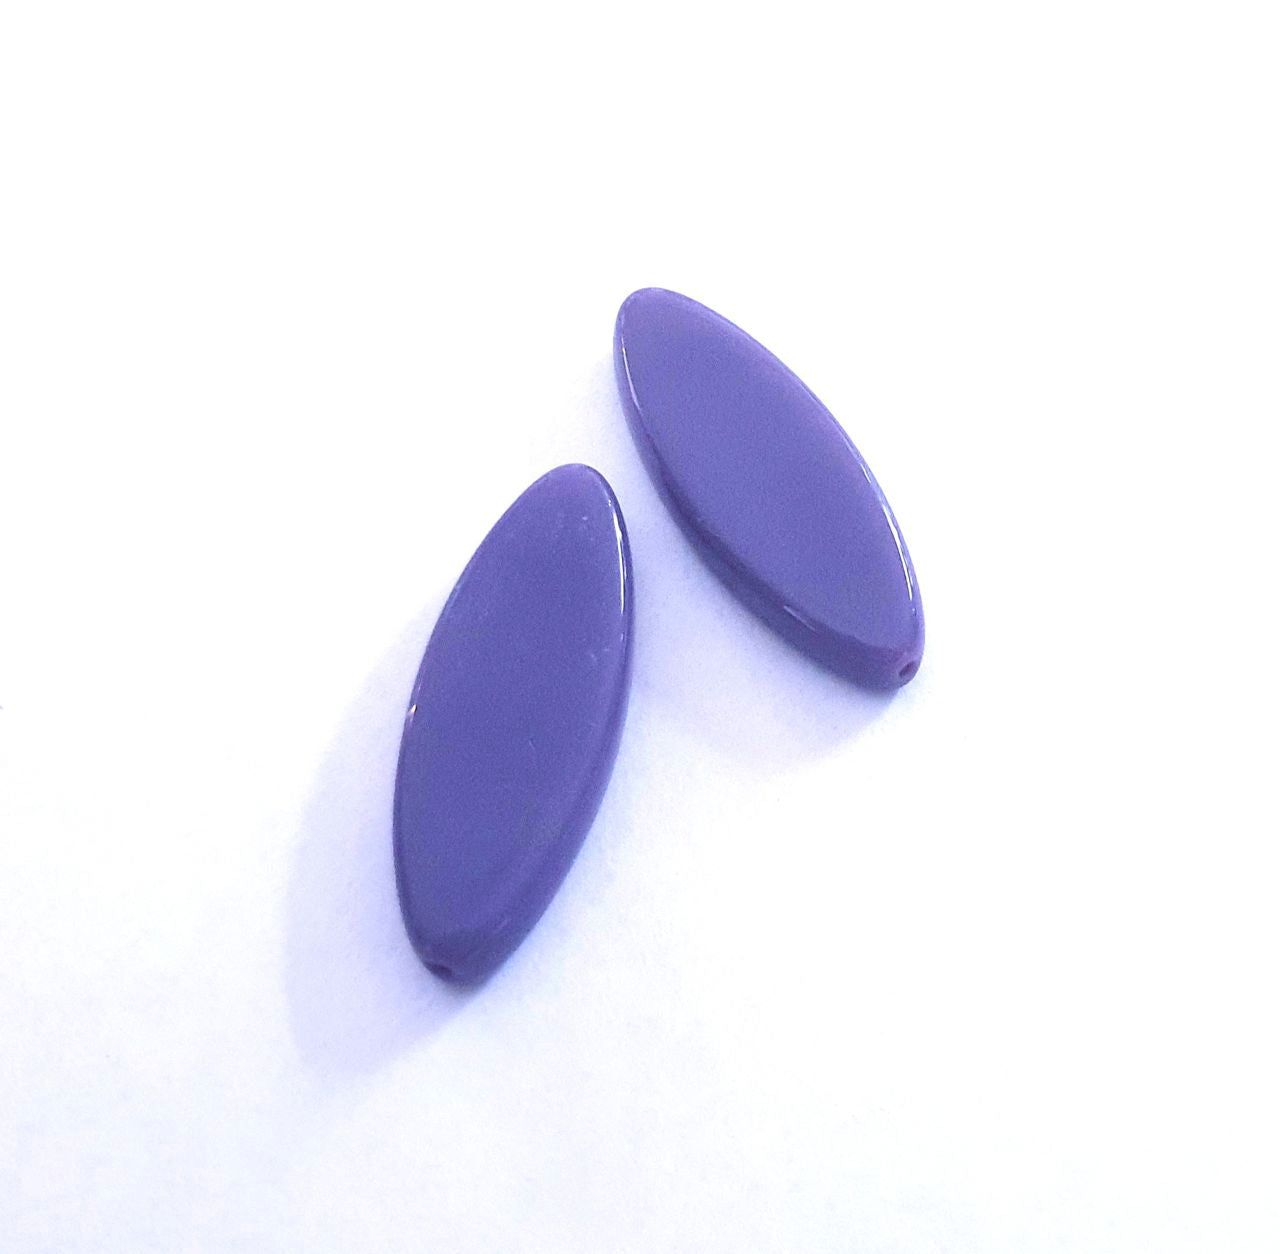 Amethyst Opaque Petal Pointed Oval Spindle 30x11mm Czech Glass Bead